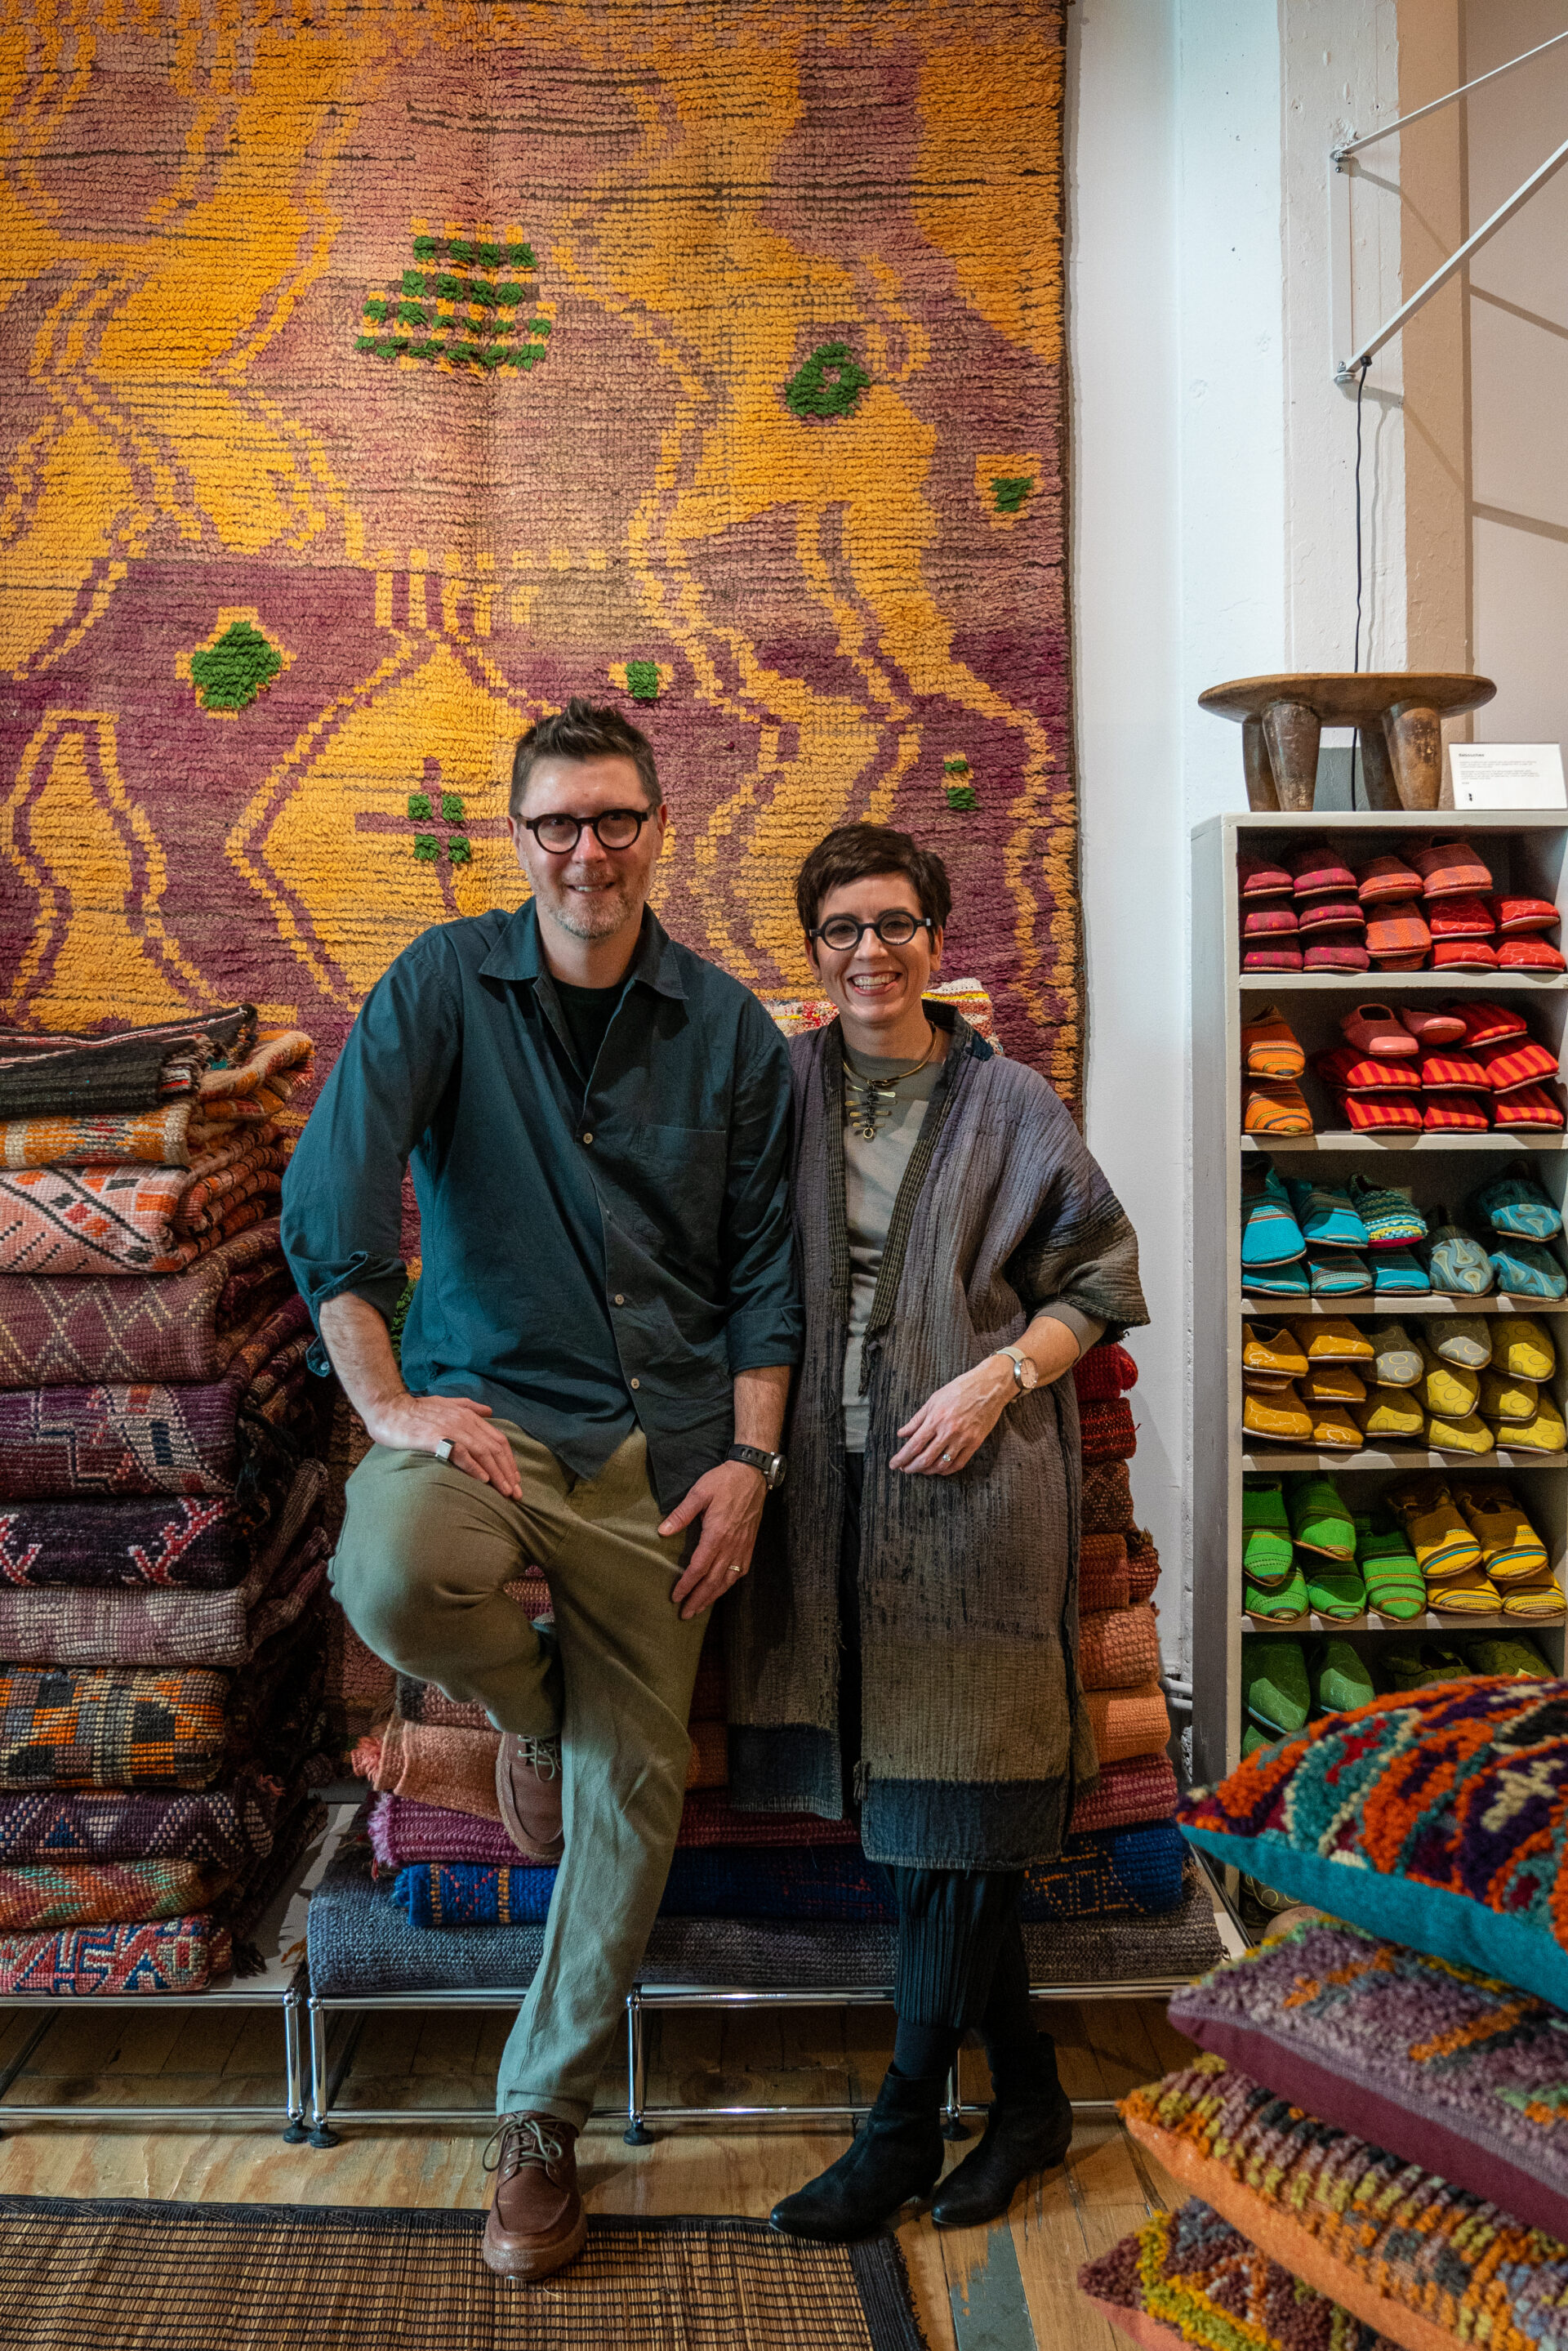 Two people are posing for a picture in front of rugs.